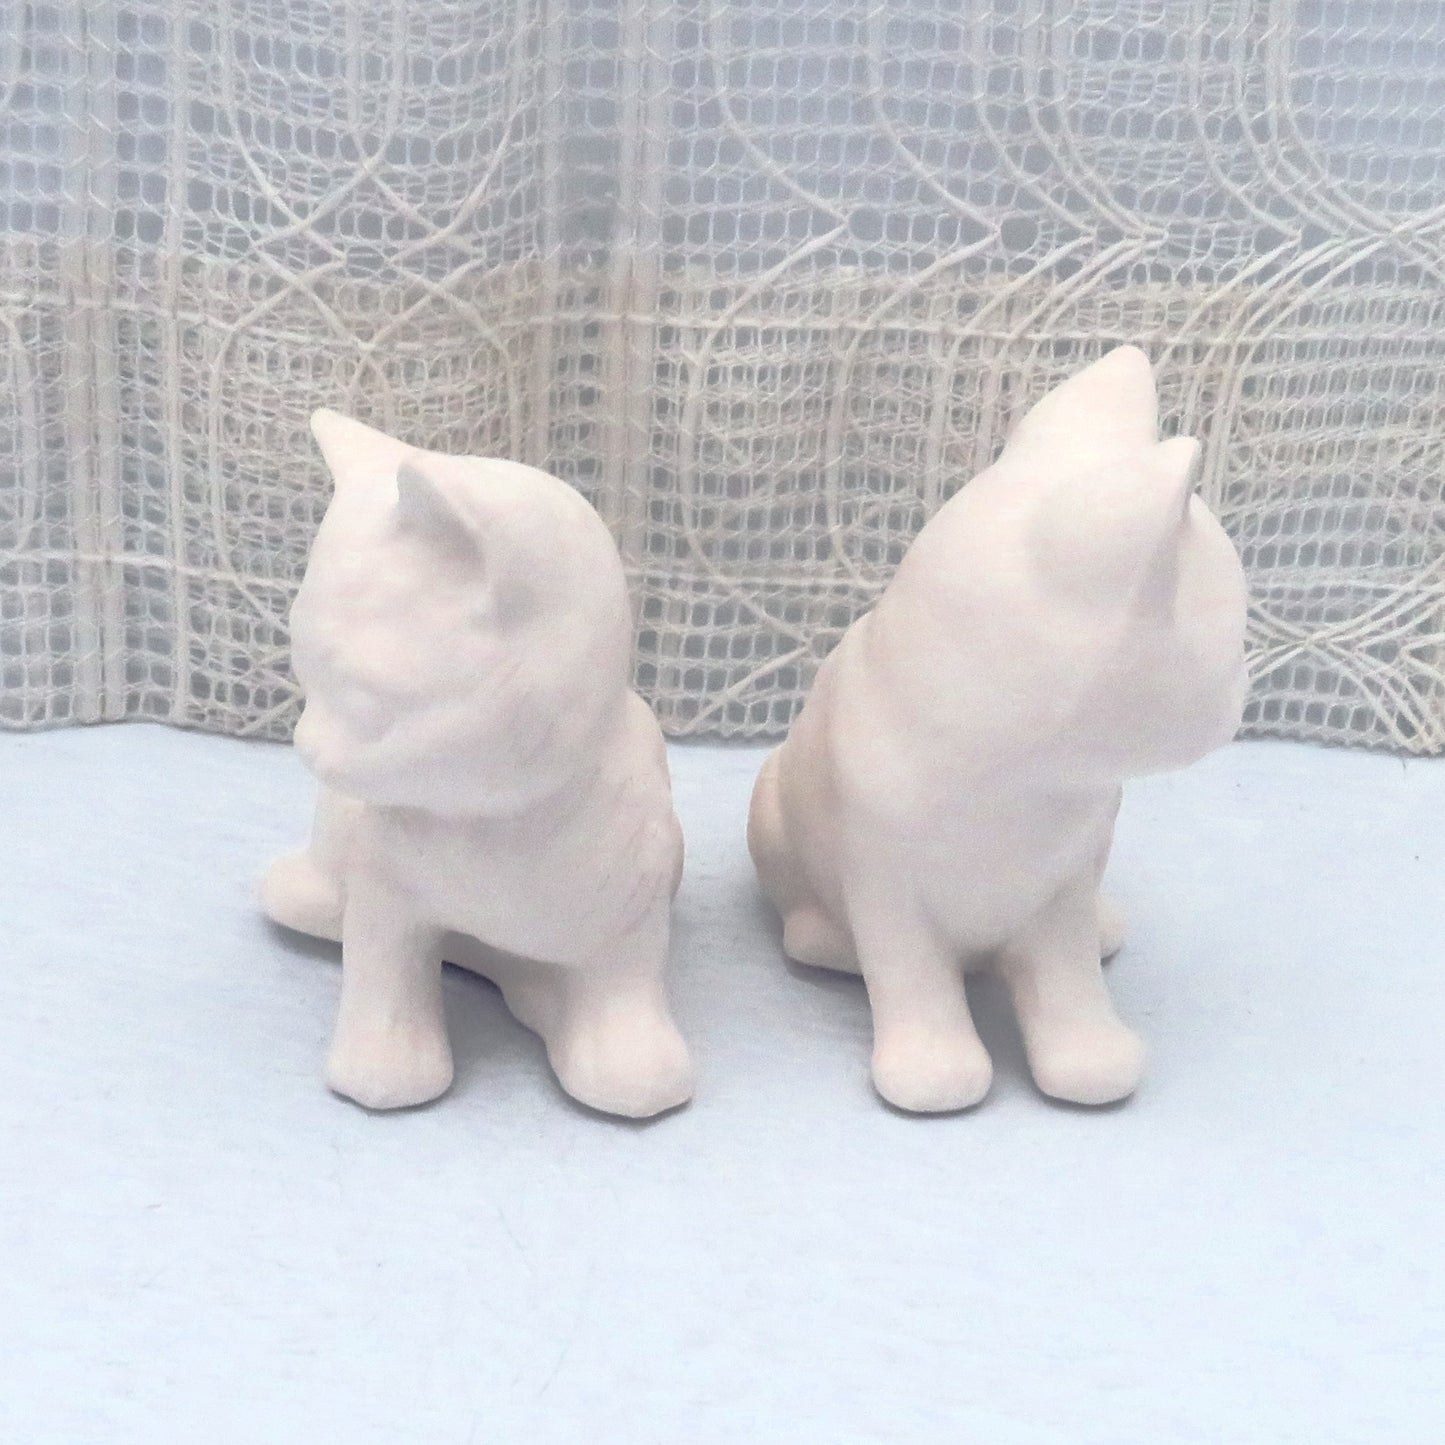 2 sitting ceramic cat figurines with the fronts forward and their faces turned away from each other.  They are on a blue table and have a lacy ecru  background.